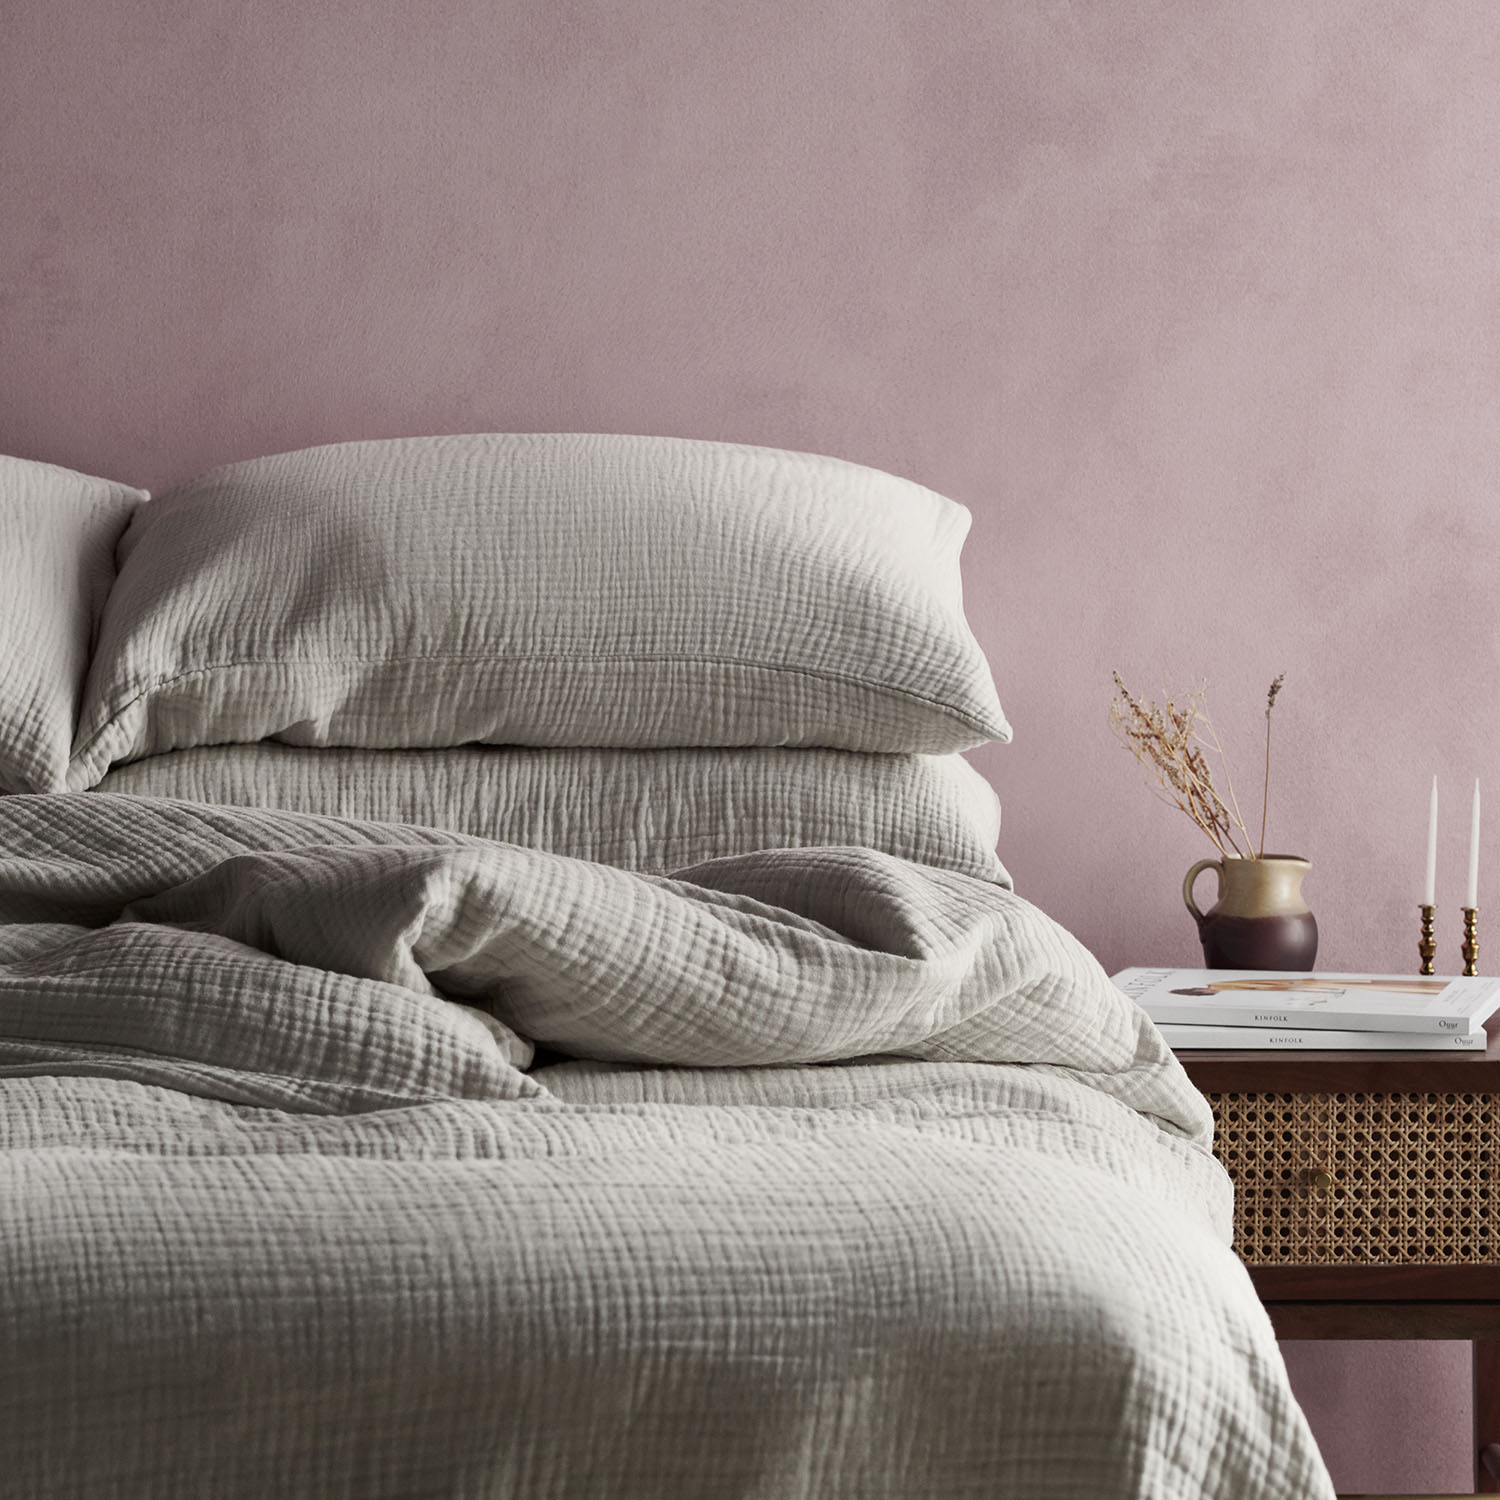 Bed dressed in grey muslin bedding against a pink concrete wall, with a rattan bedside table